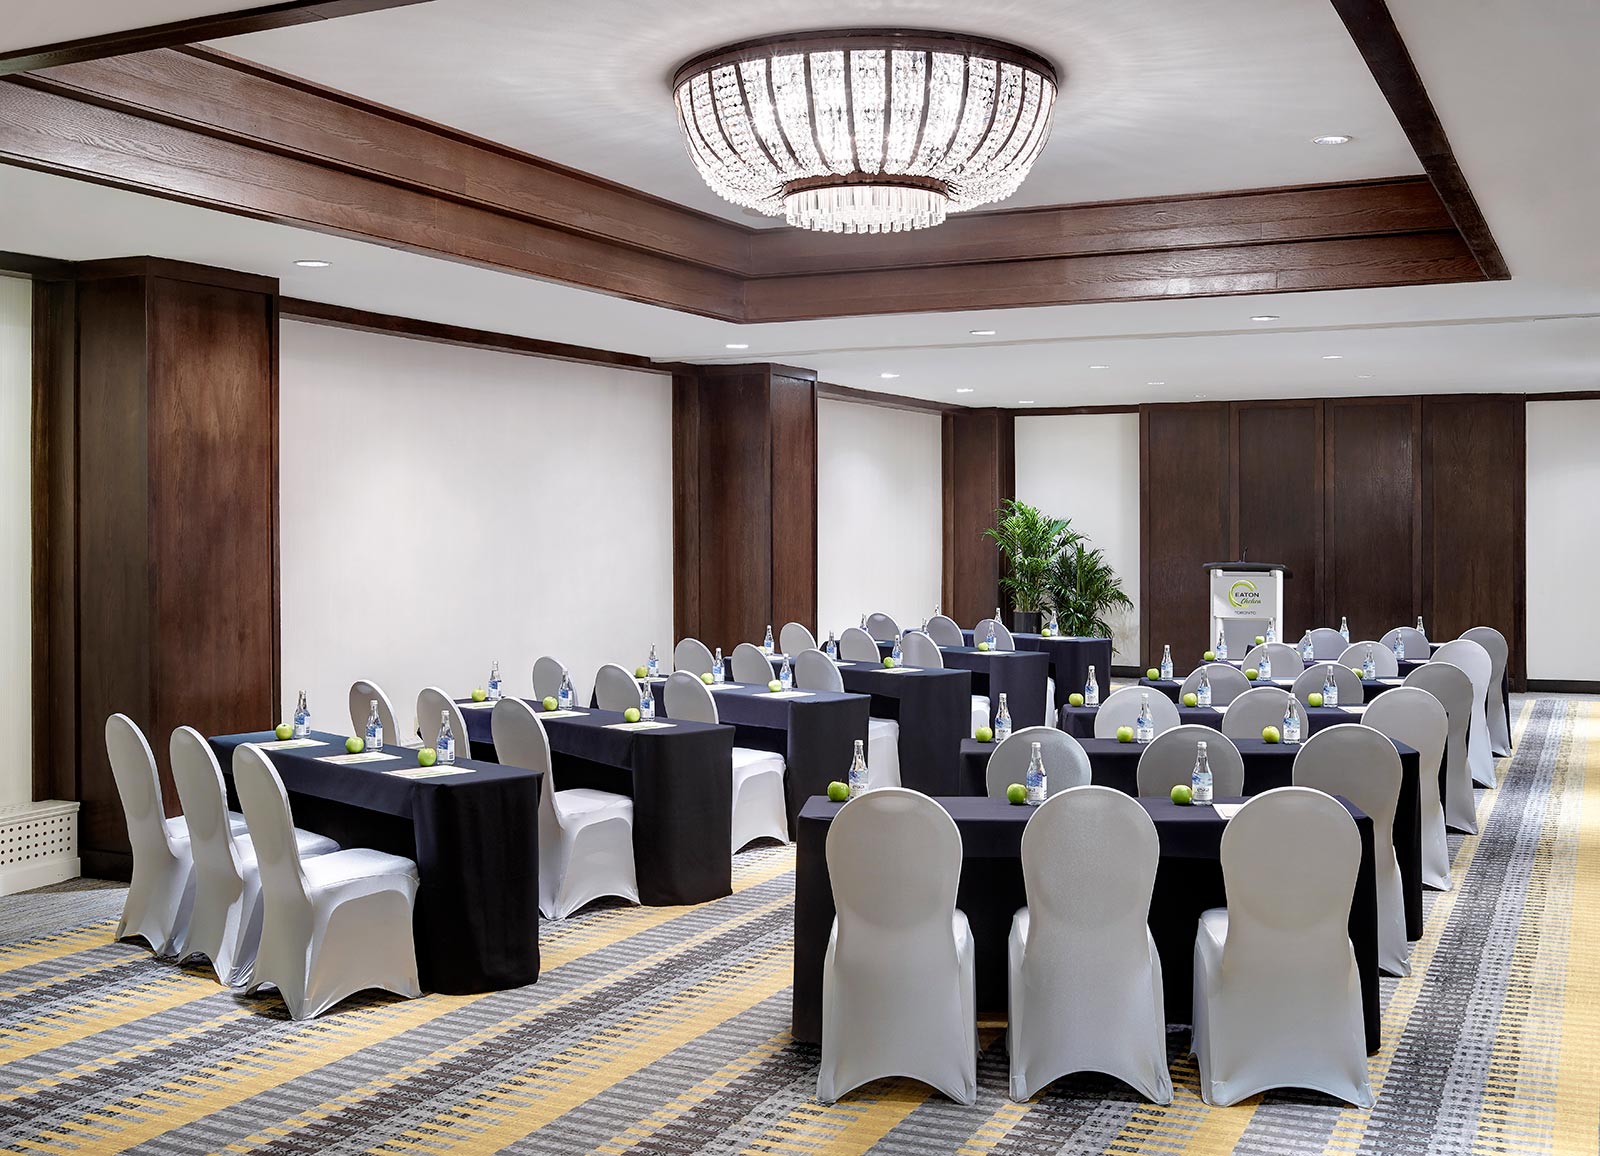 rossetti-room, Corporate Meeting & Conference Rooms in Chelsea Hotel, Toronto